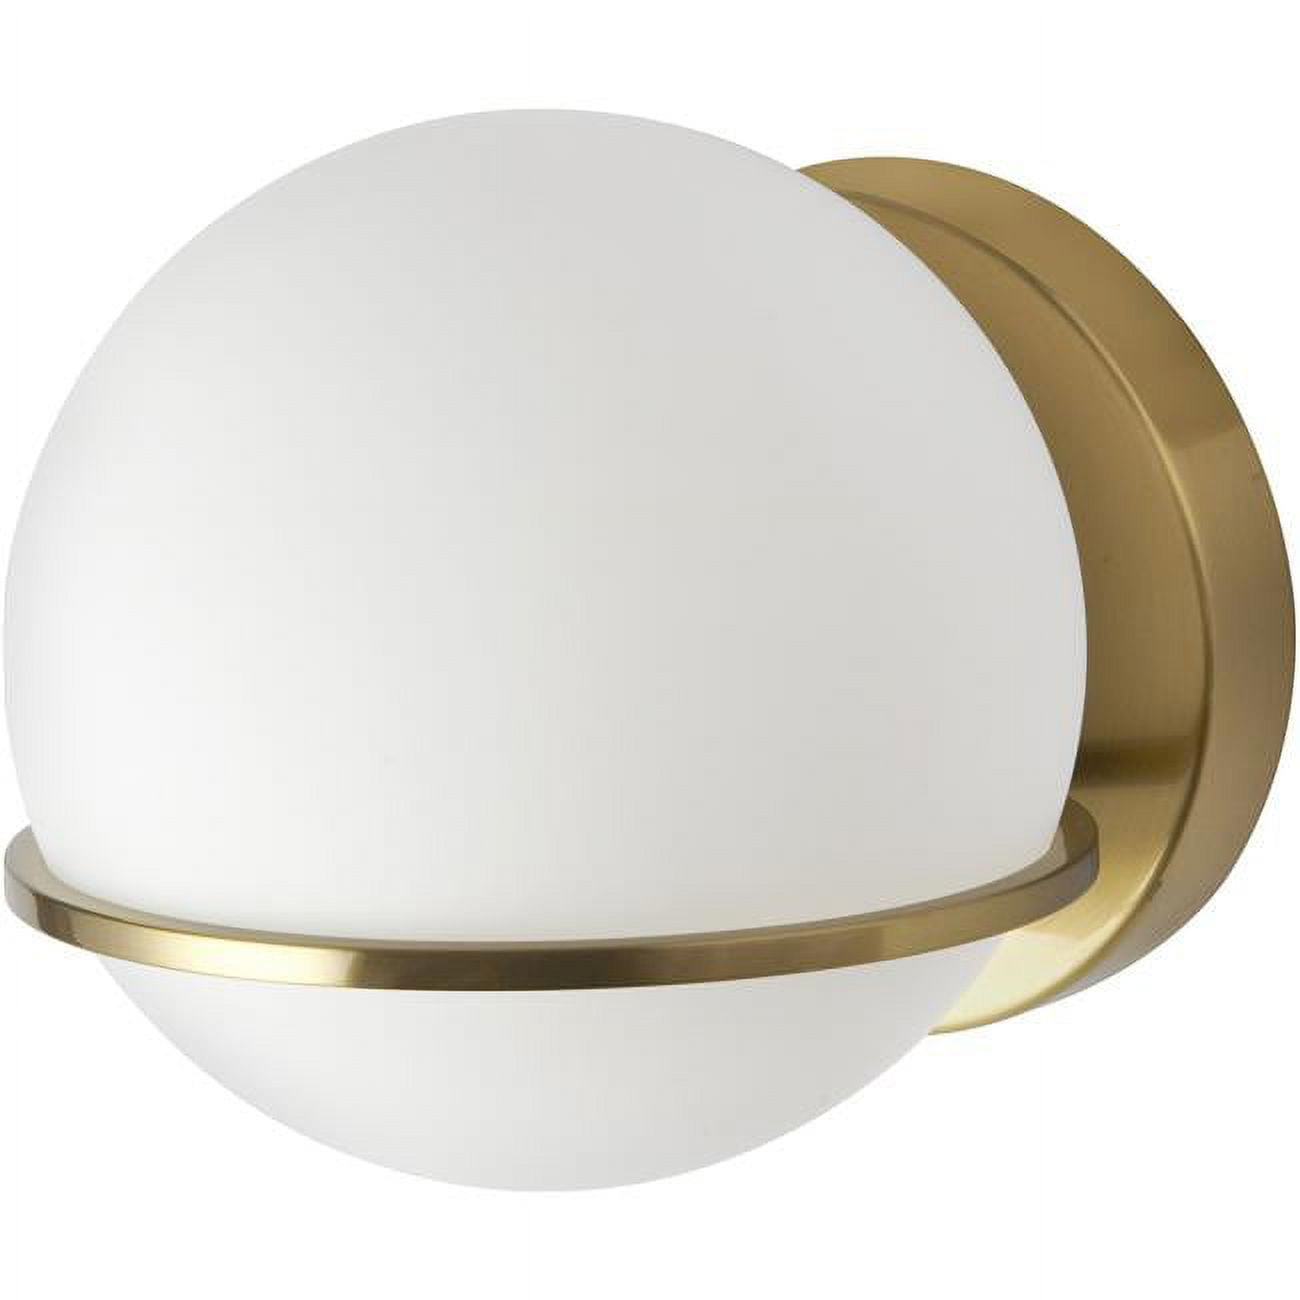 Picture of Dainolite SOF-61W-AGB 1 Light Halogen Wall Sconce, Aged Brass with White Opal Glass